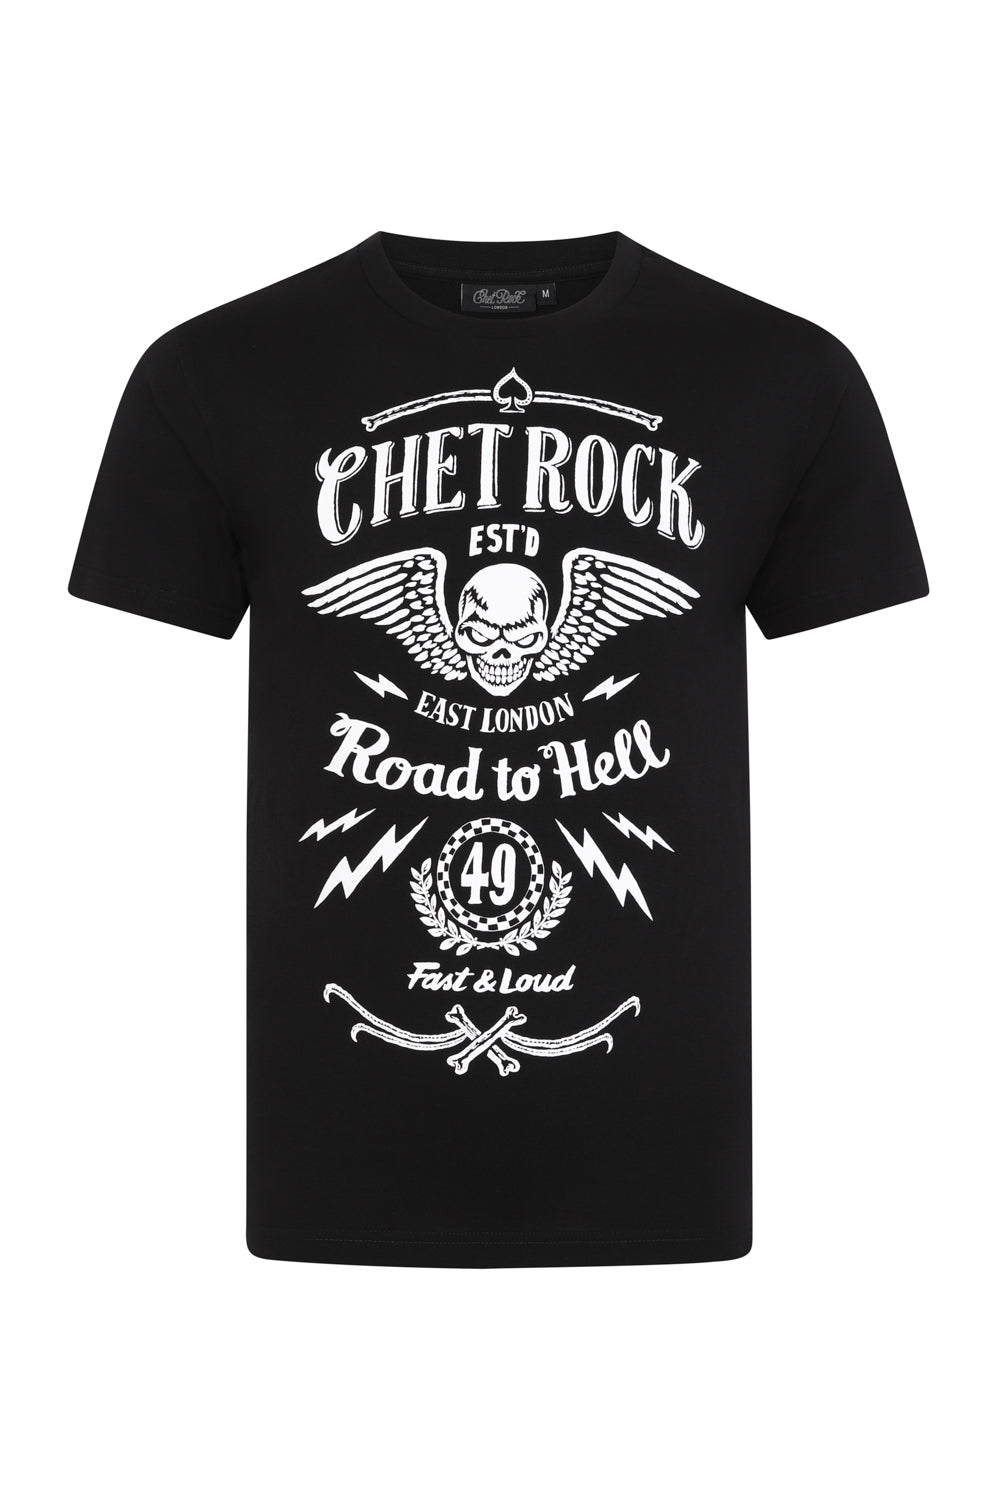 ROAD TO HELL SHORT SLEEVE T-SHIRT